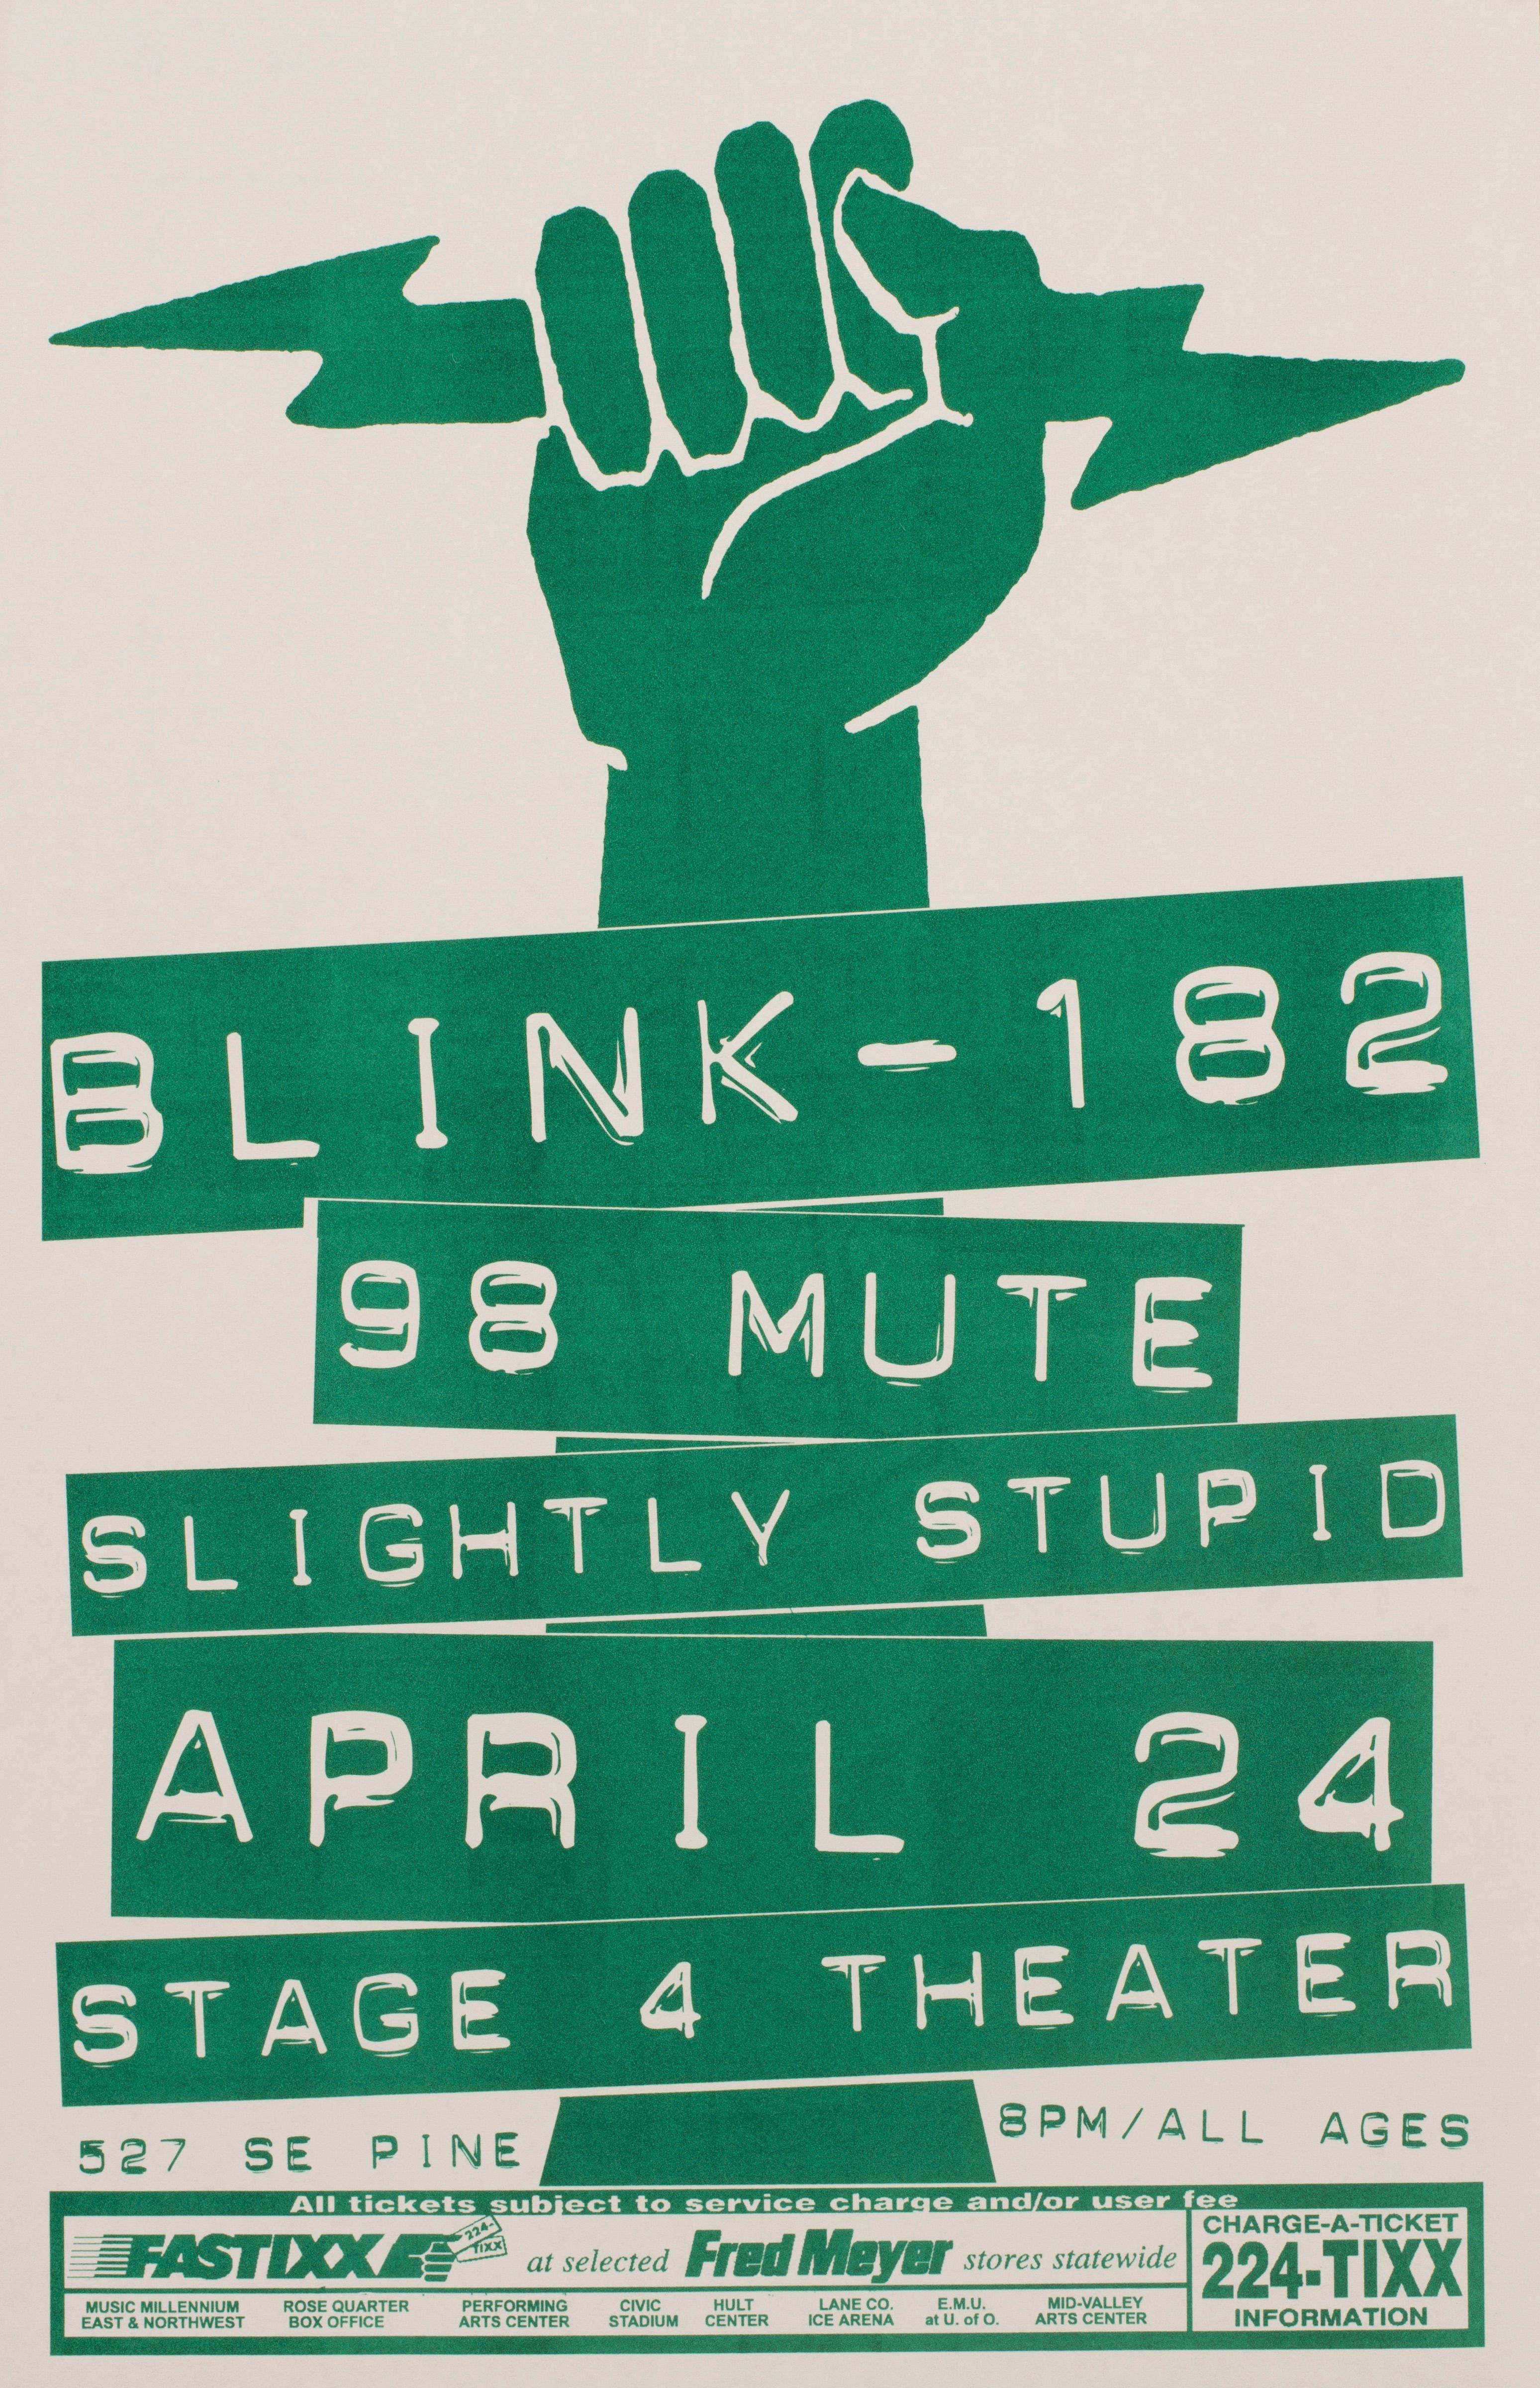 MXP-17.5 Blink-182 Stage 4 Theater 1997 Concert Poster